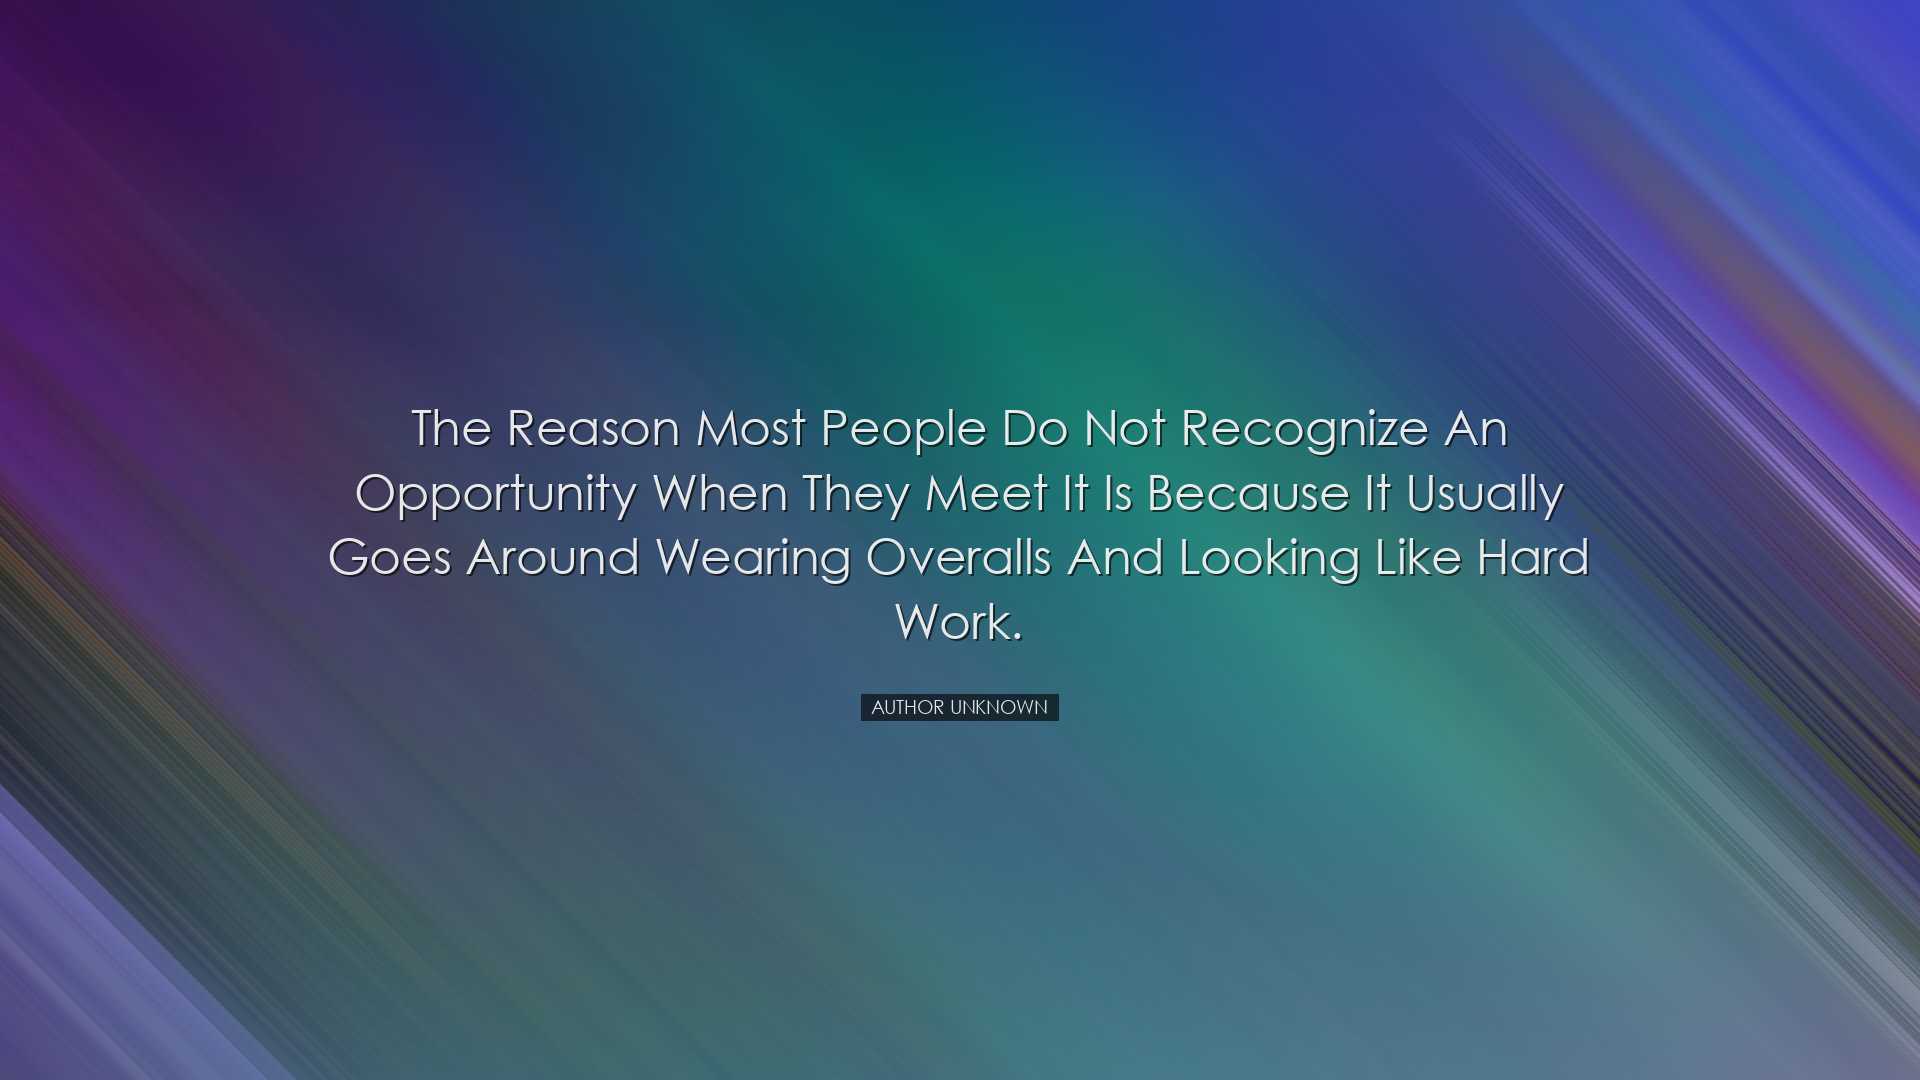 The reason most people do not recognize an opportunity when they m